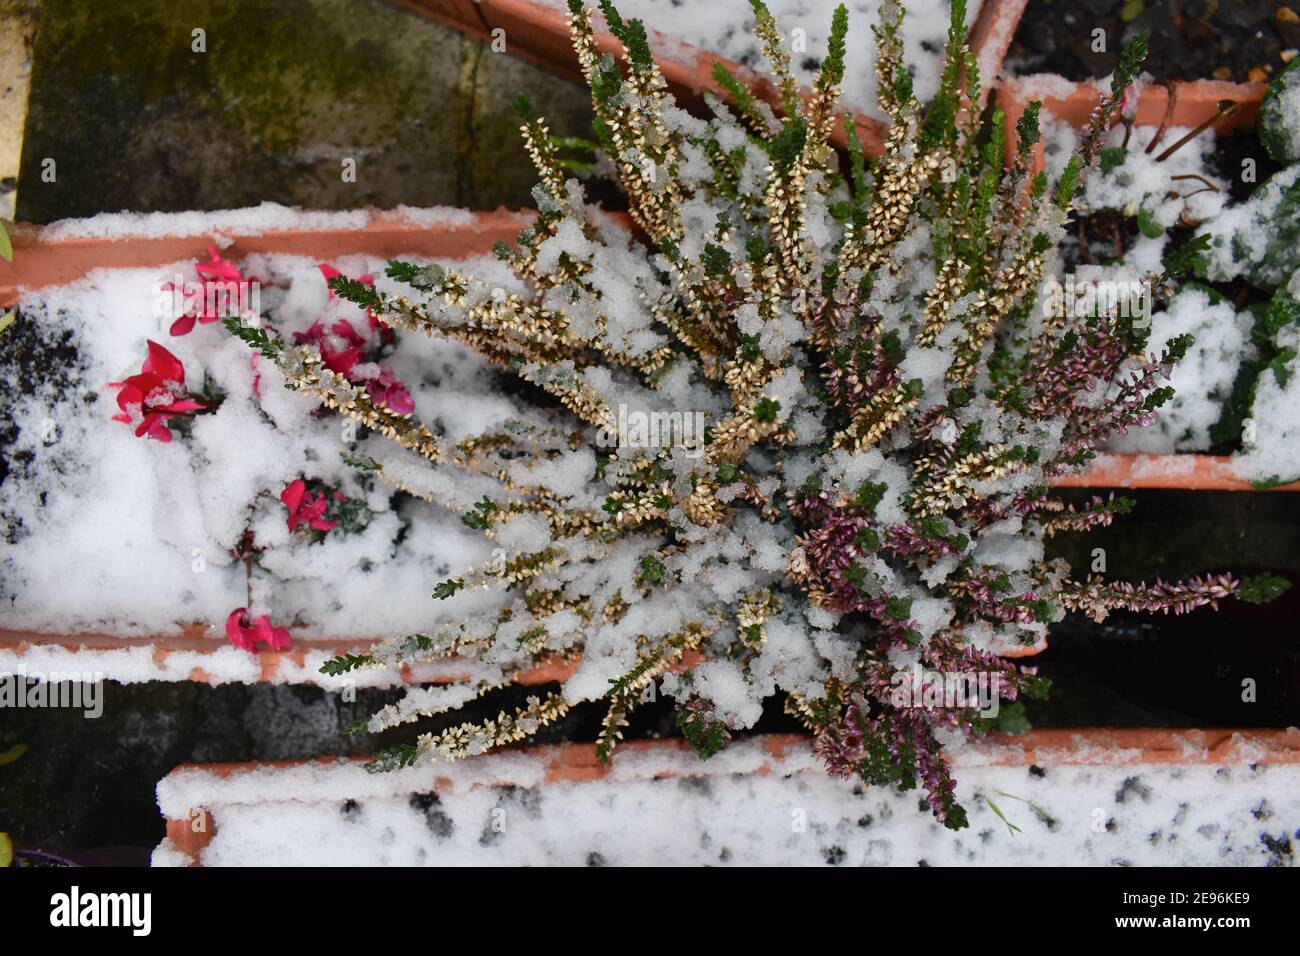 Snow covered tricolour heather shrub and petite ivy-leaved pink red purple cyclamen in a sheltered urban garden Hardy evergreen foliage in cold months Stock Photo